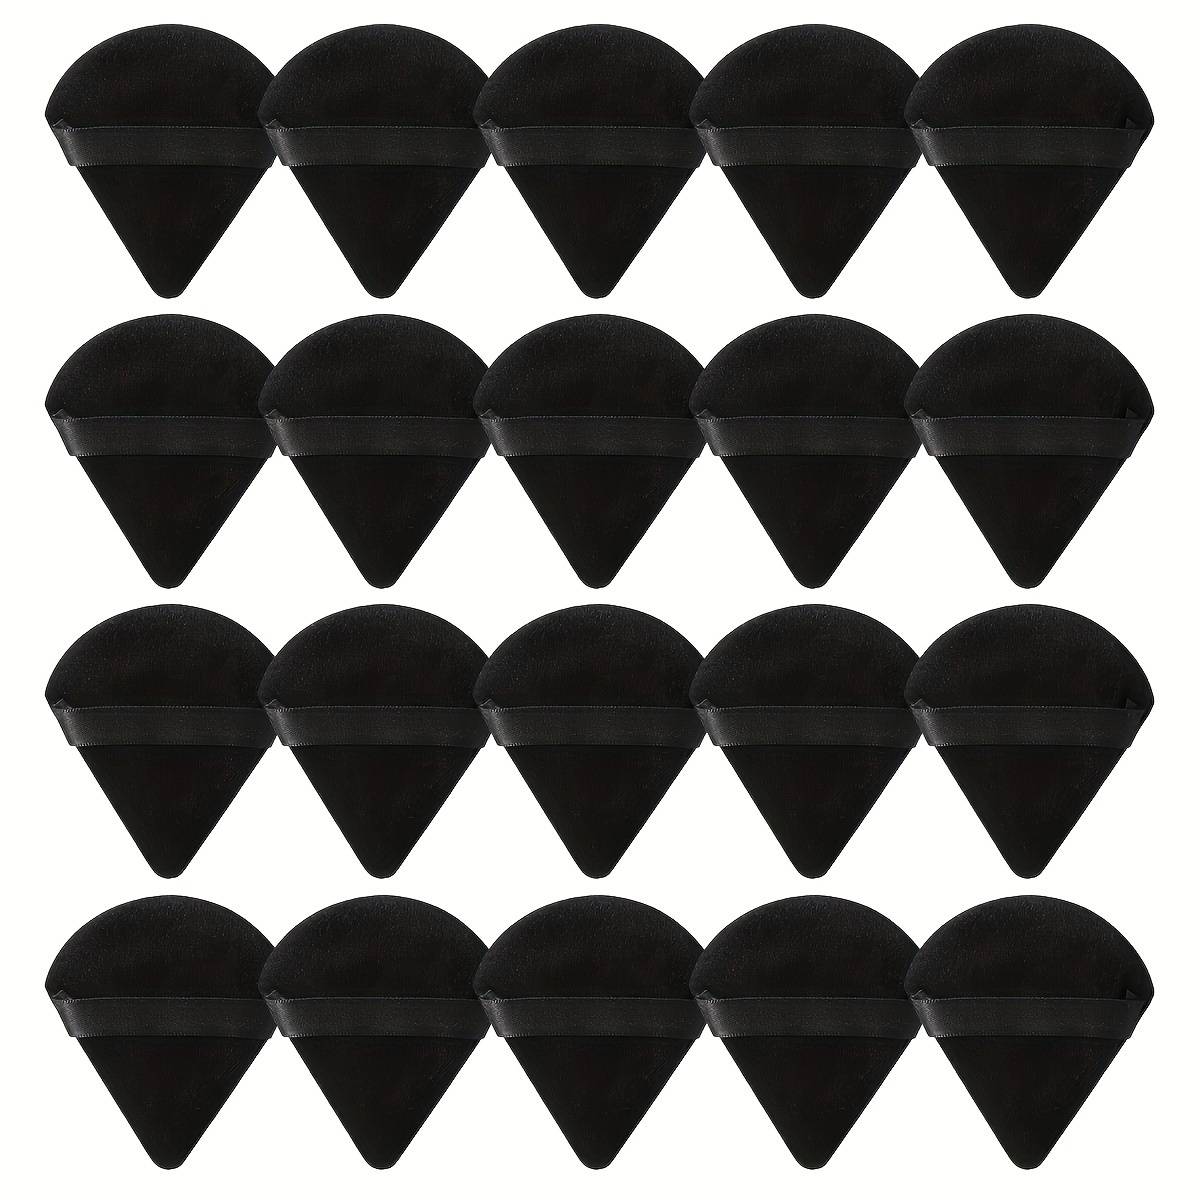 

20 Pieces Black Triangle Powder Puff Makeup Puff Velour Face Ultra Soft Washable For Loose Powder Body Cosmetic Foundation Sponge Wet Dry Makeup Tool For Makeup Starters